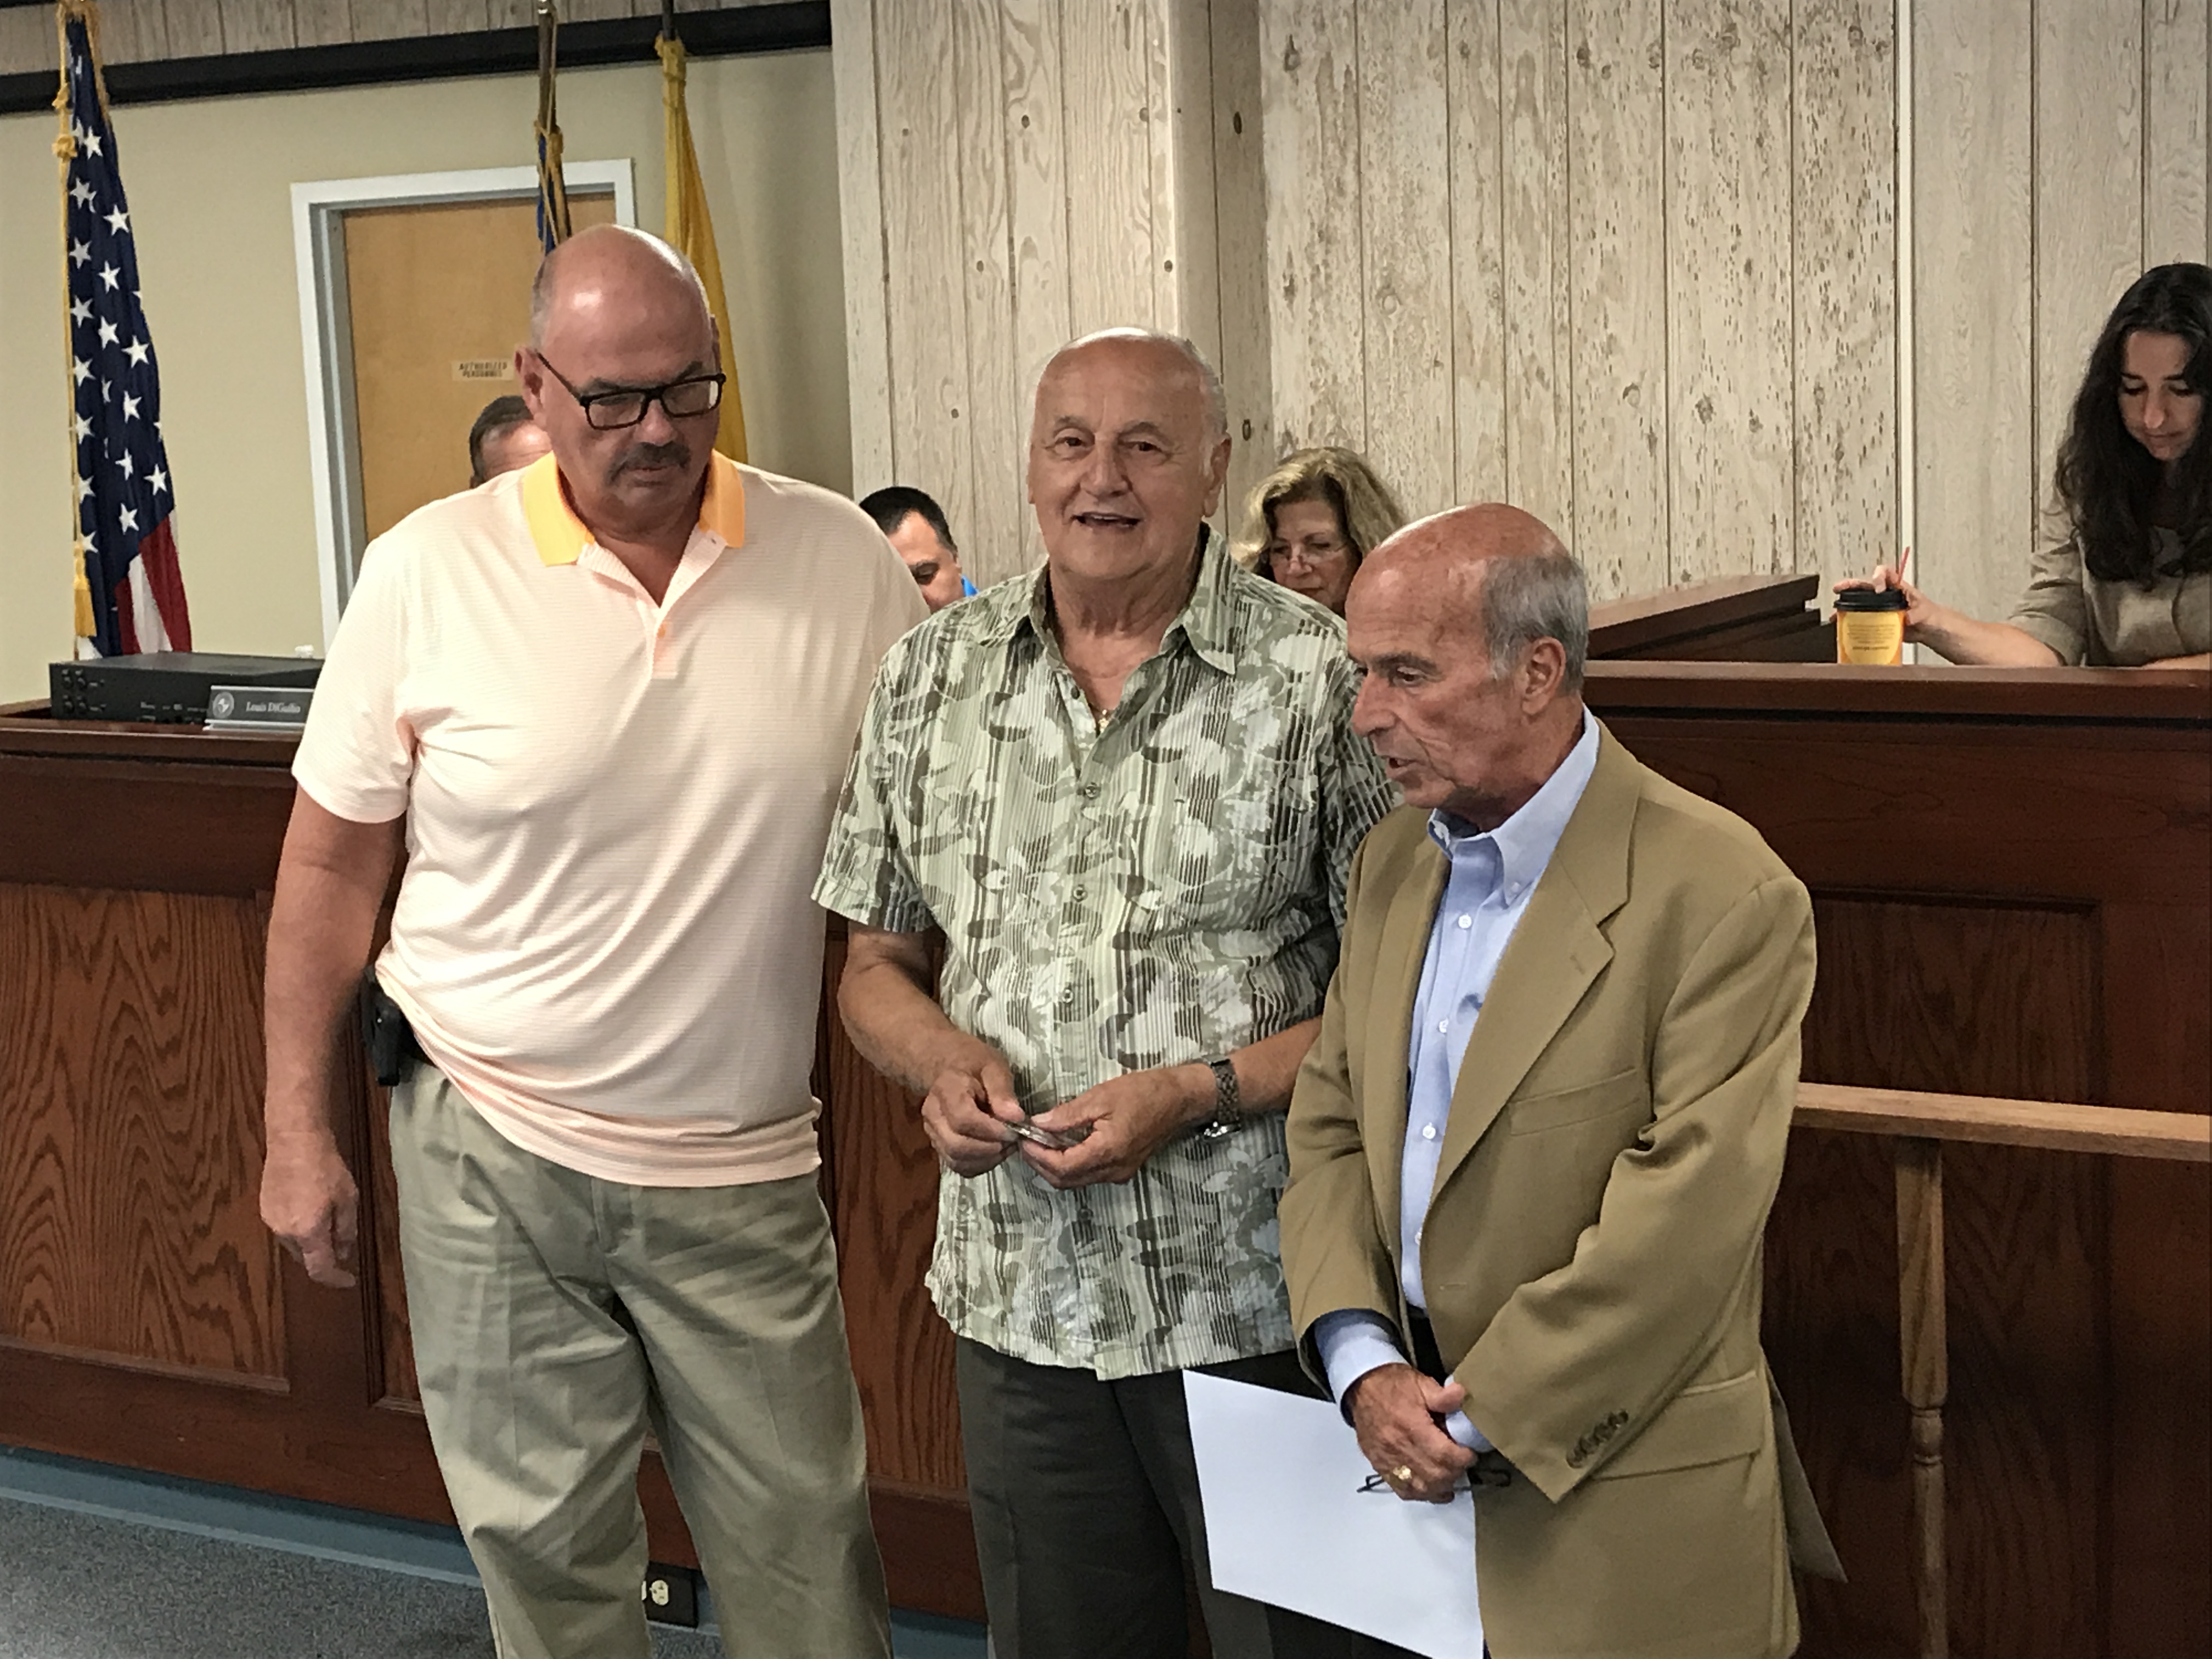 Councilmen Rich Tompkins and Guy Mazzanti receiving honors at the Seaside Heights municipal complex. (Photo: Daniel Nee)